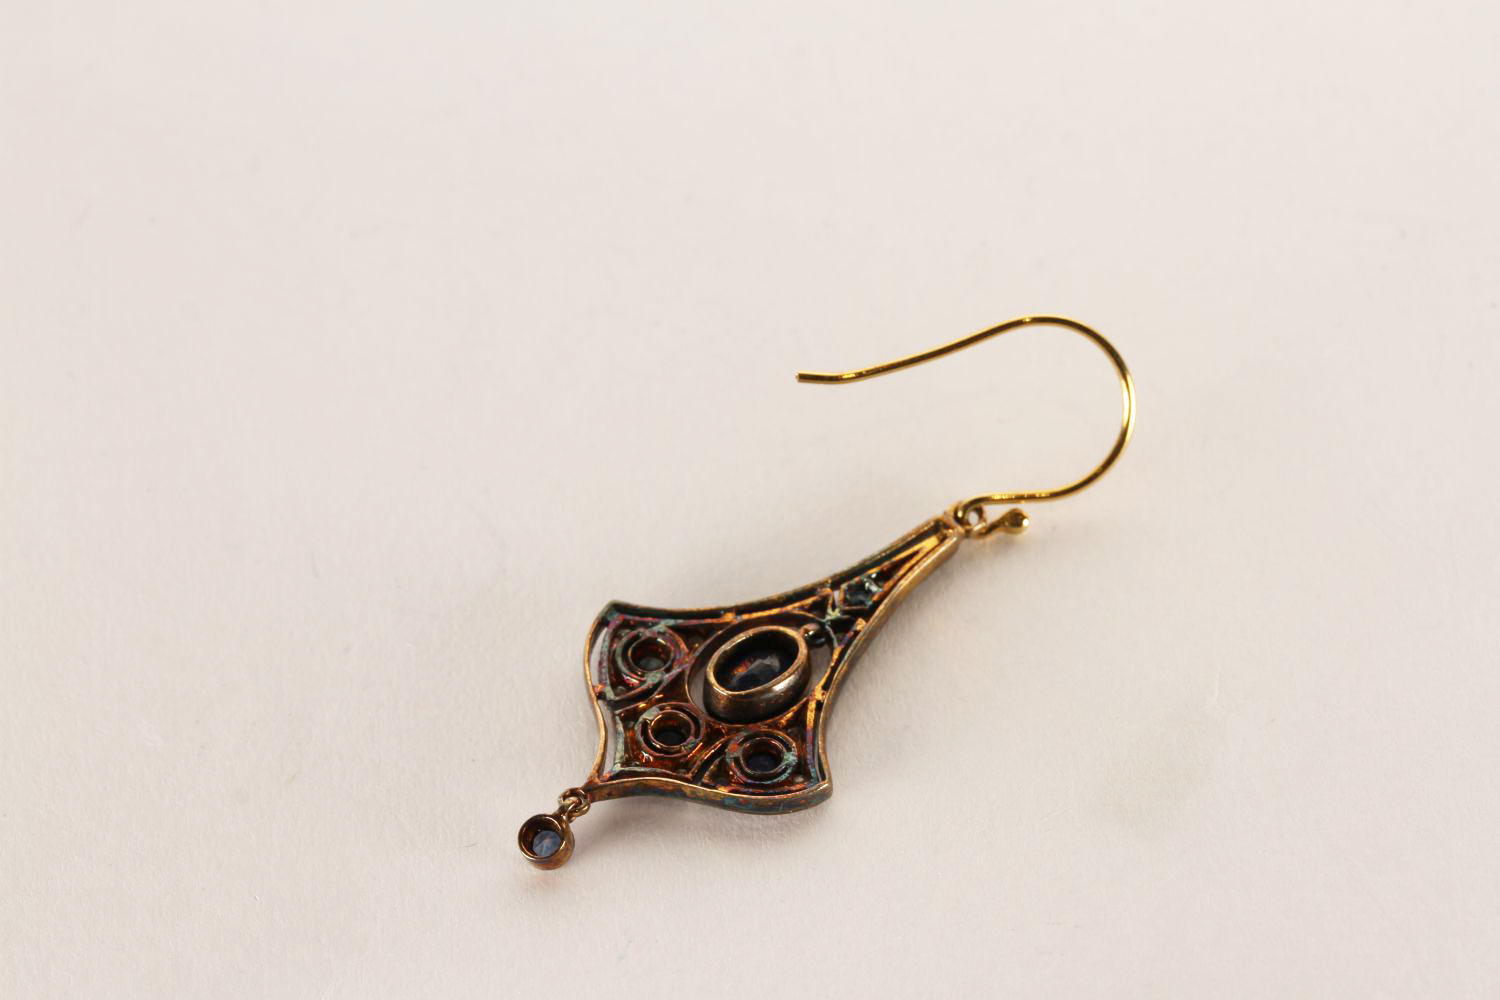 Pair of Sapphire and Diamond Flared-Design Drop Earrings, set with sapphires and diamonds, fish hook - Image 2 of 2